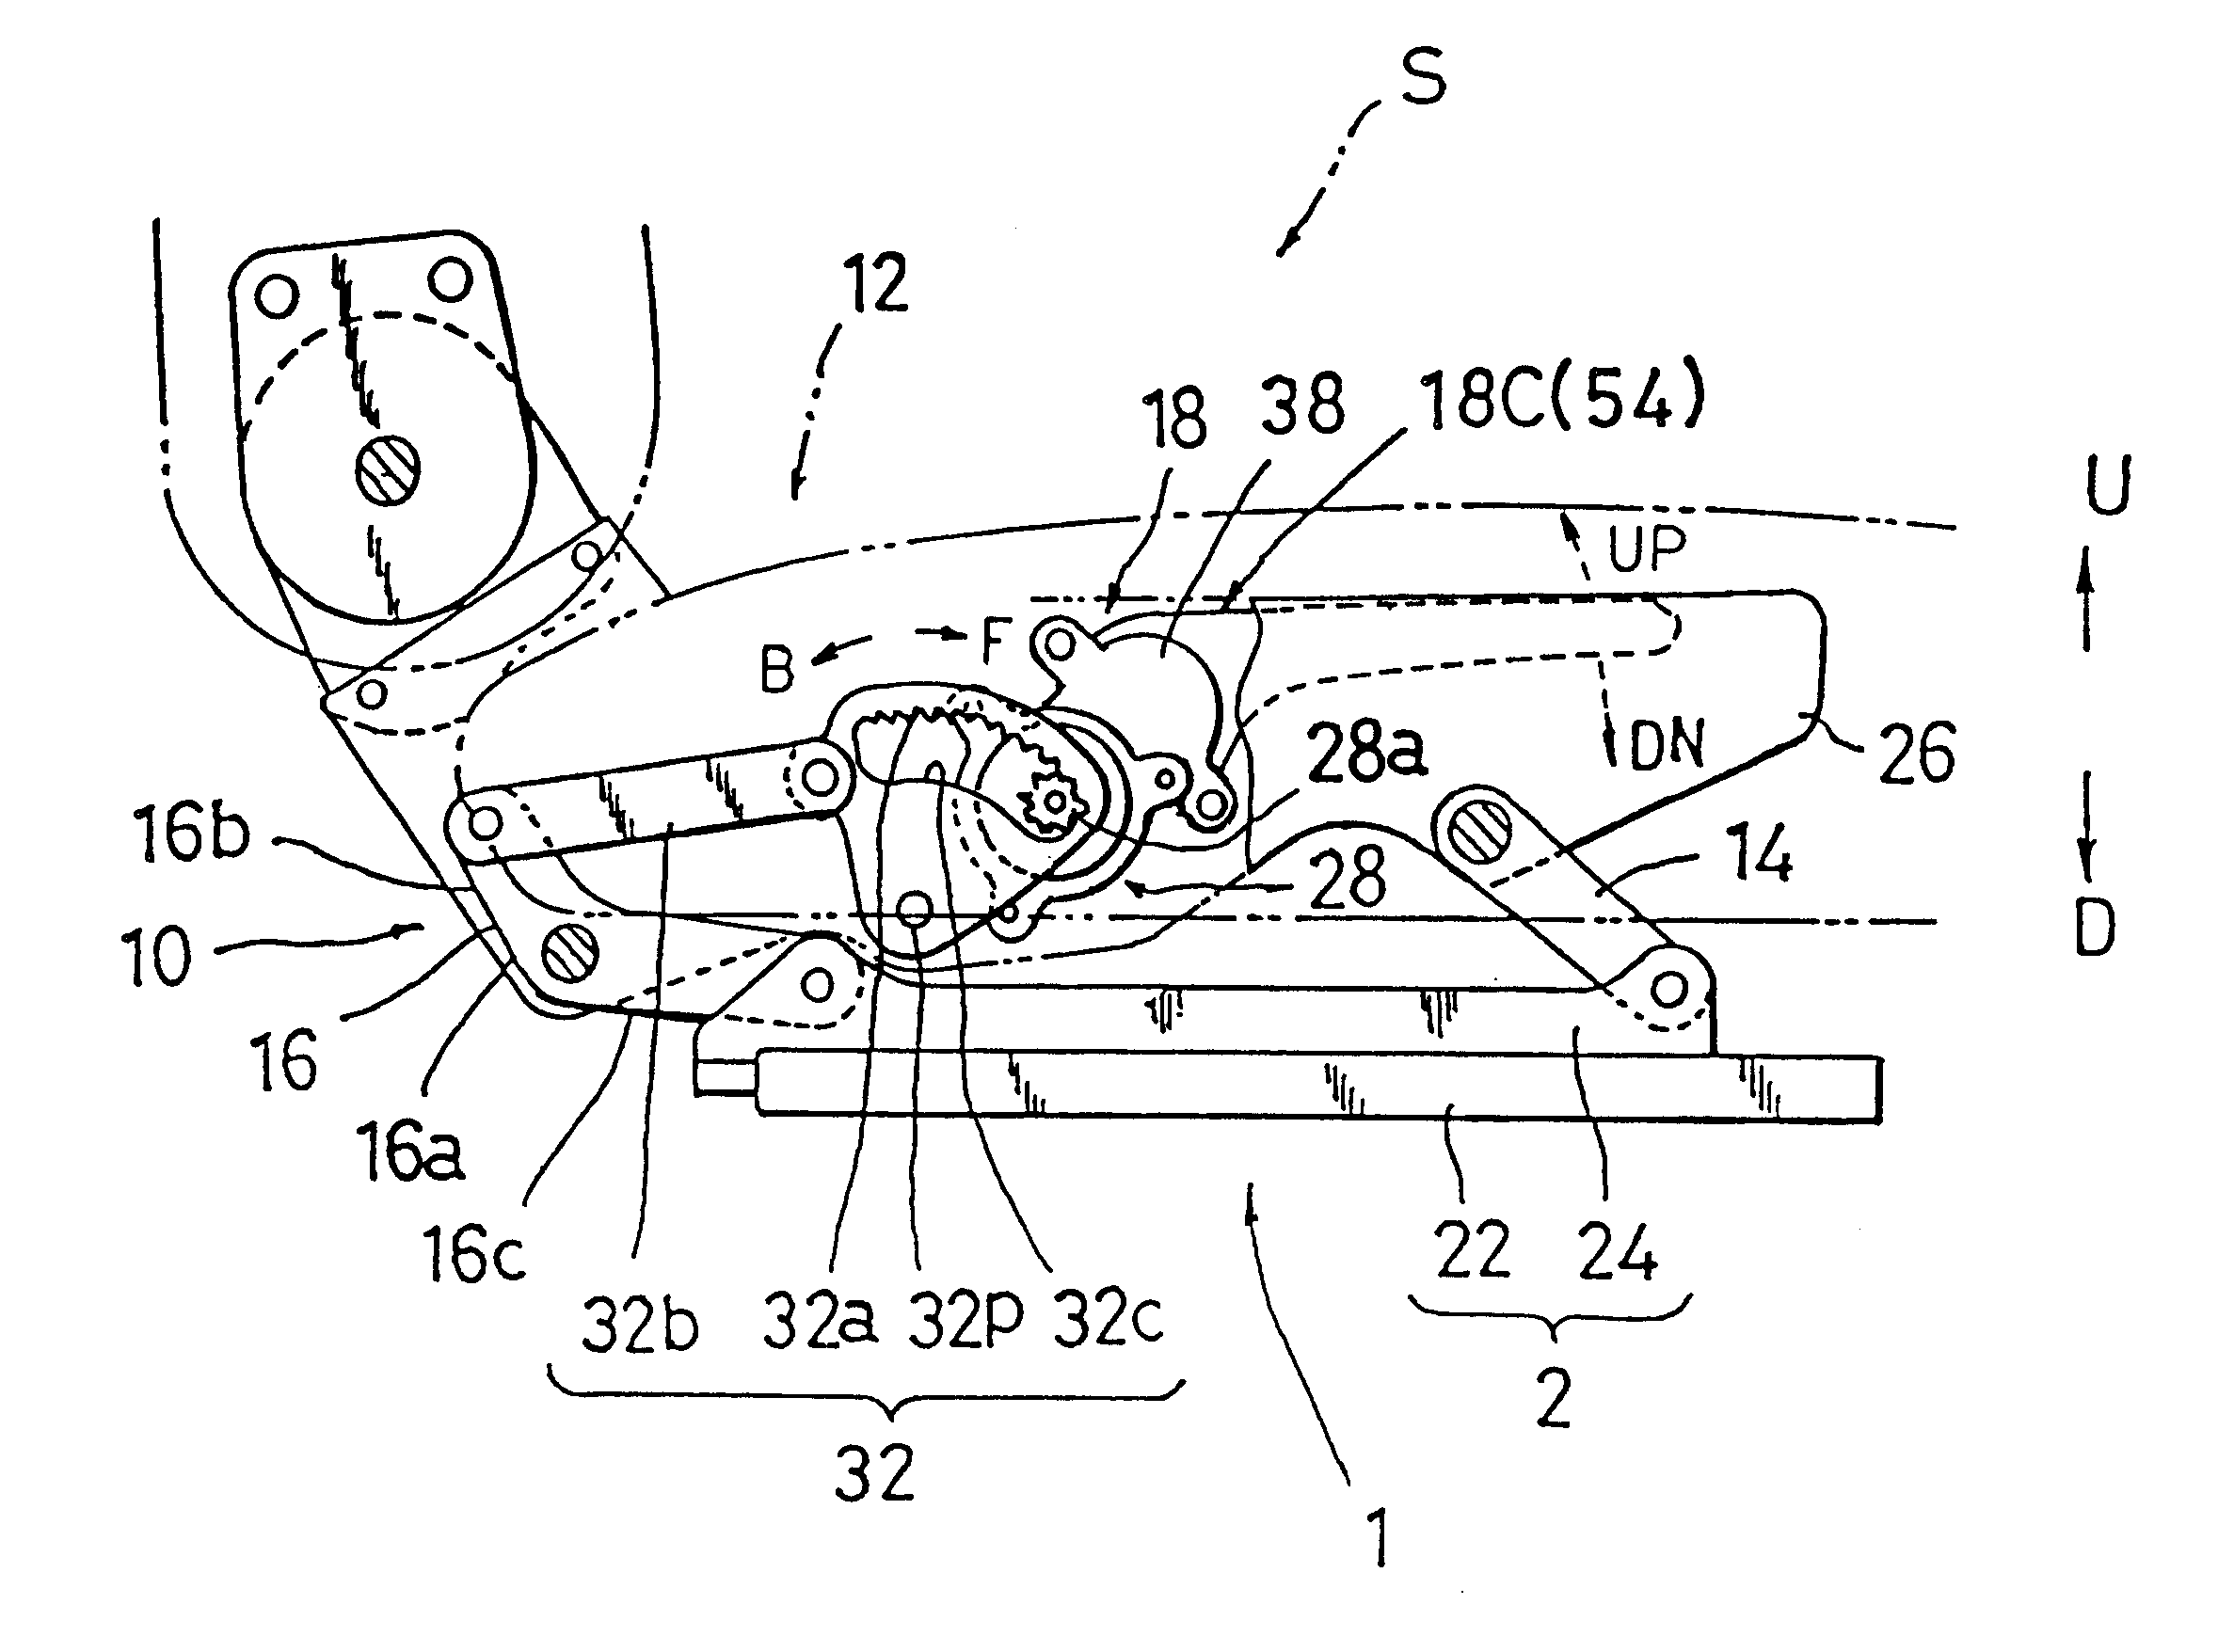 Seat lifter with ratchet-type lever mechanism